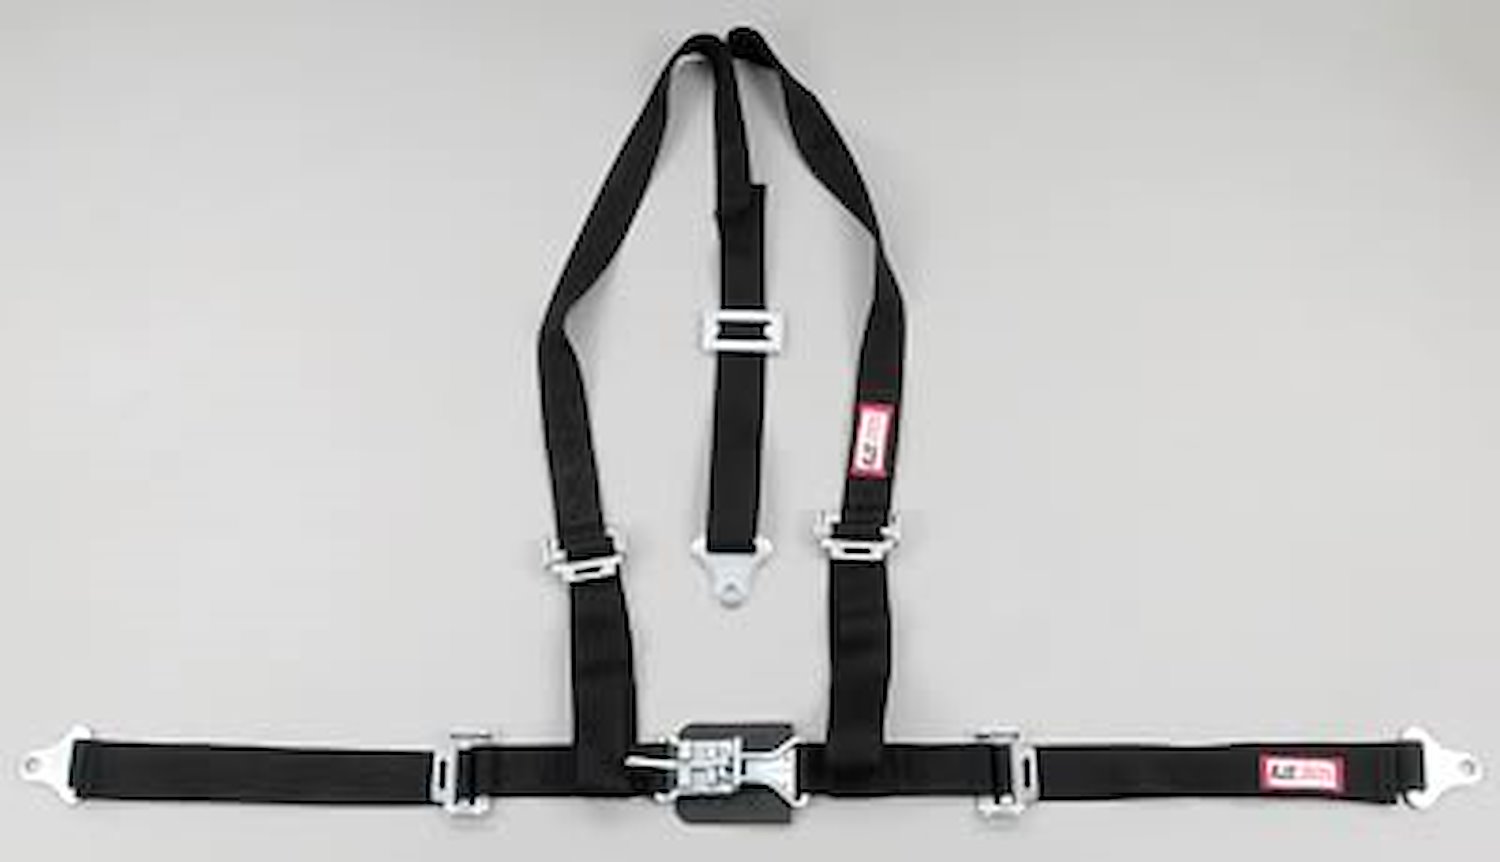 NON-SFI L&L HARNESS 3 PULL UP Lap Belt SEWN IN 2 Shoulder Harness V ROLL BAR Mount ALL WRAP ENDS BLUE